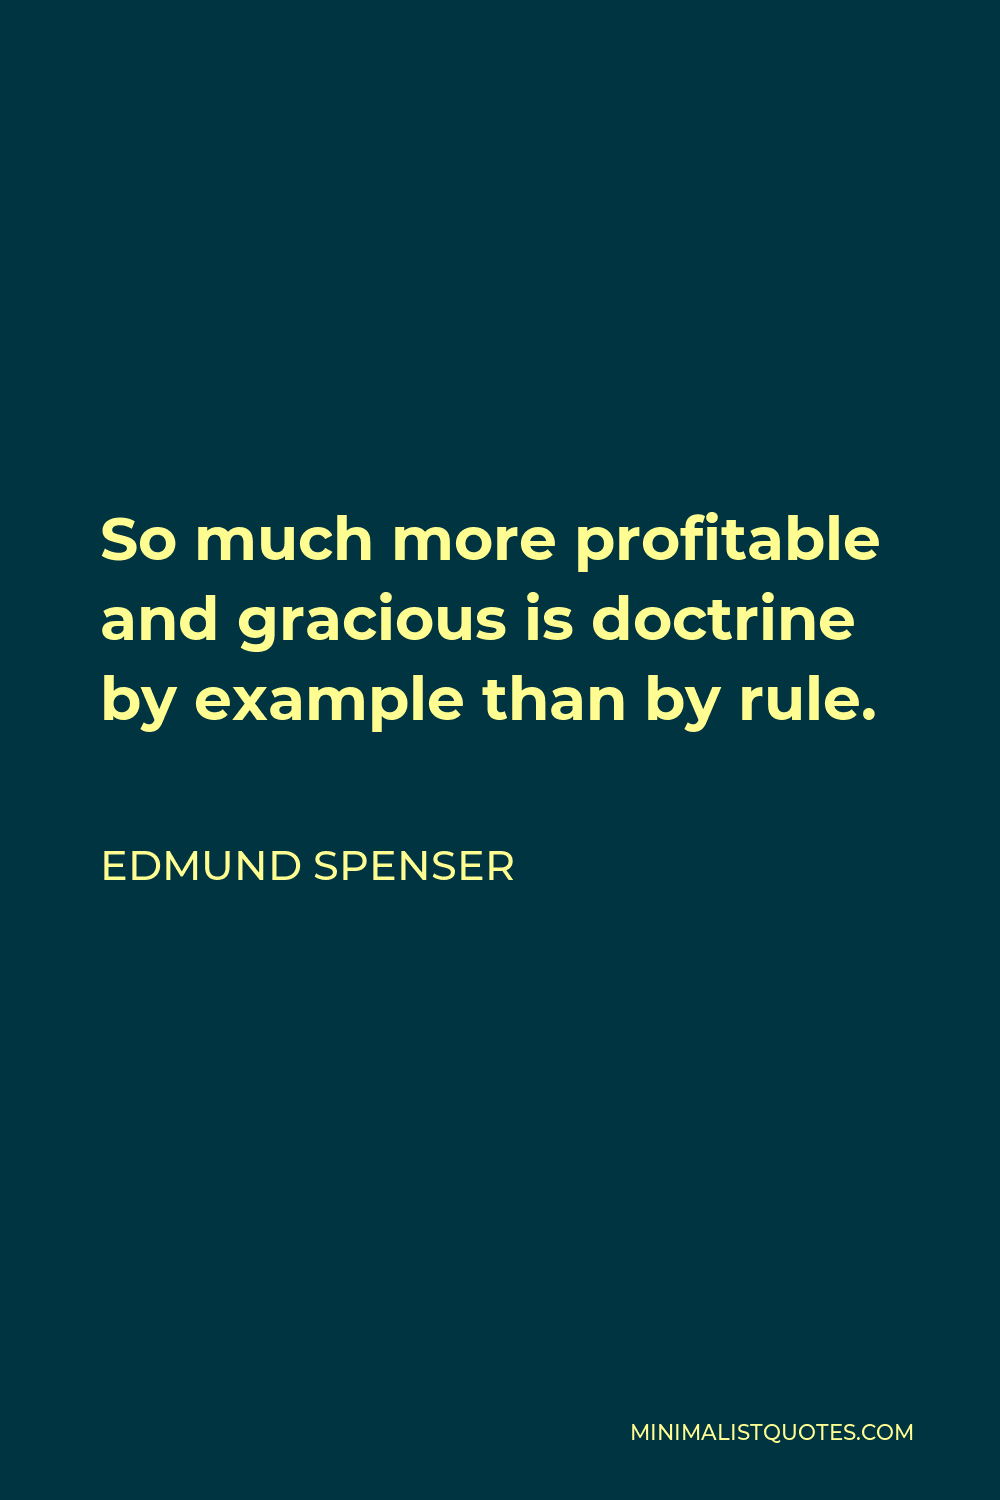 Edmund Spenser Quote - So much more profitable and gracious is doctrine by example than by rule.